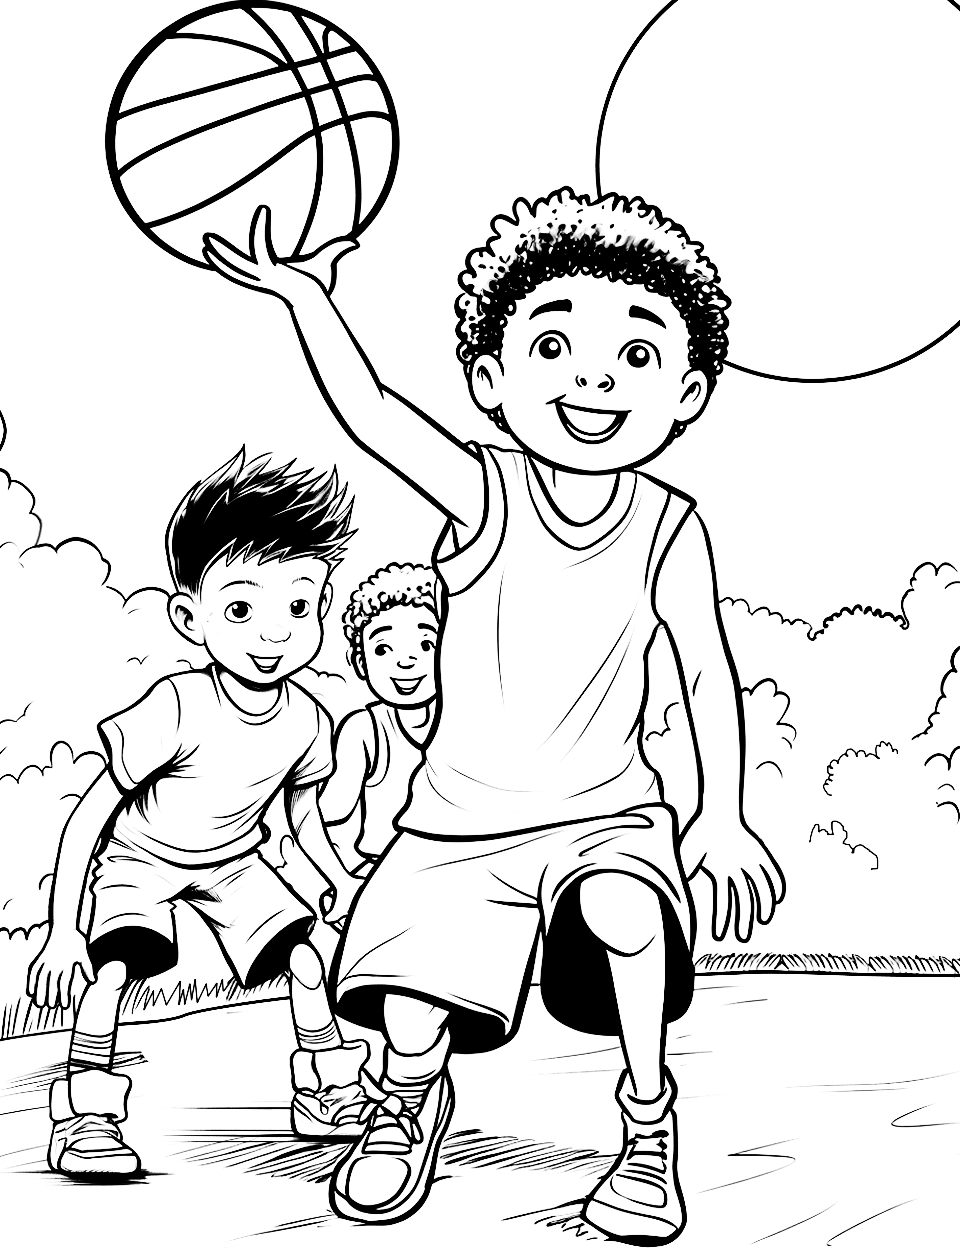 Basketball Camp Fun Coloring Page - Kids learning to play basketball at a summer camp.